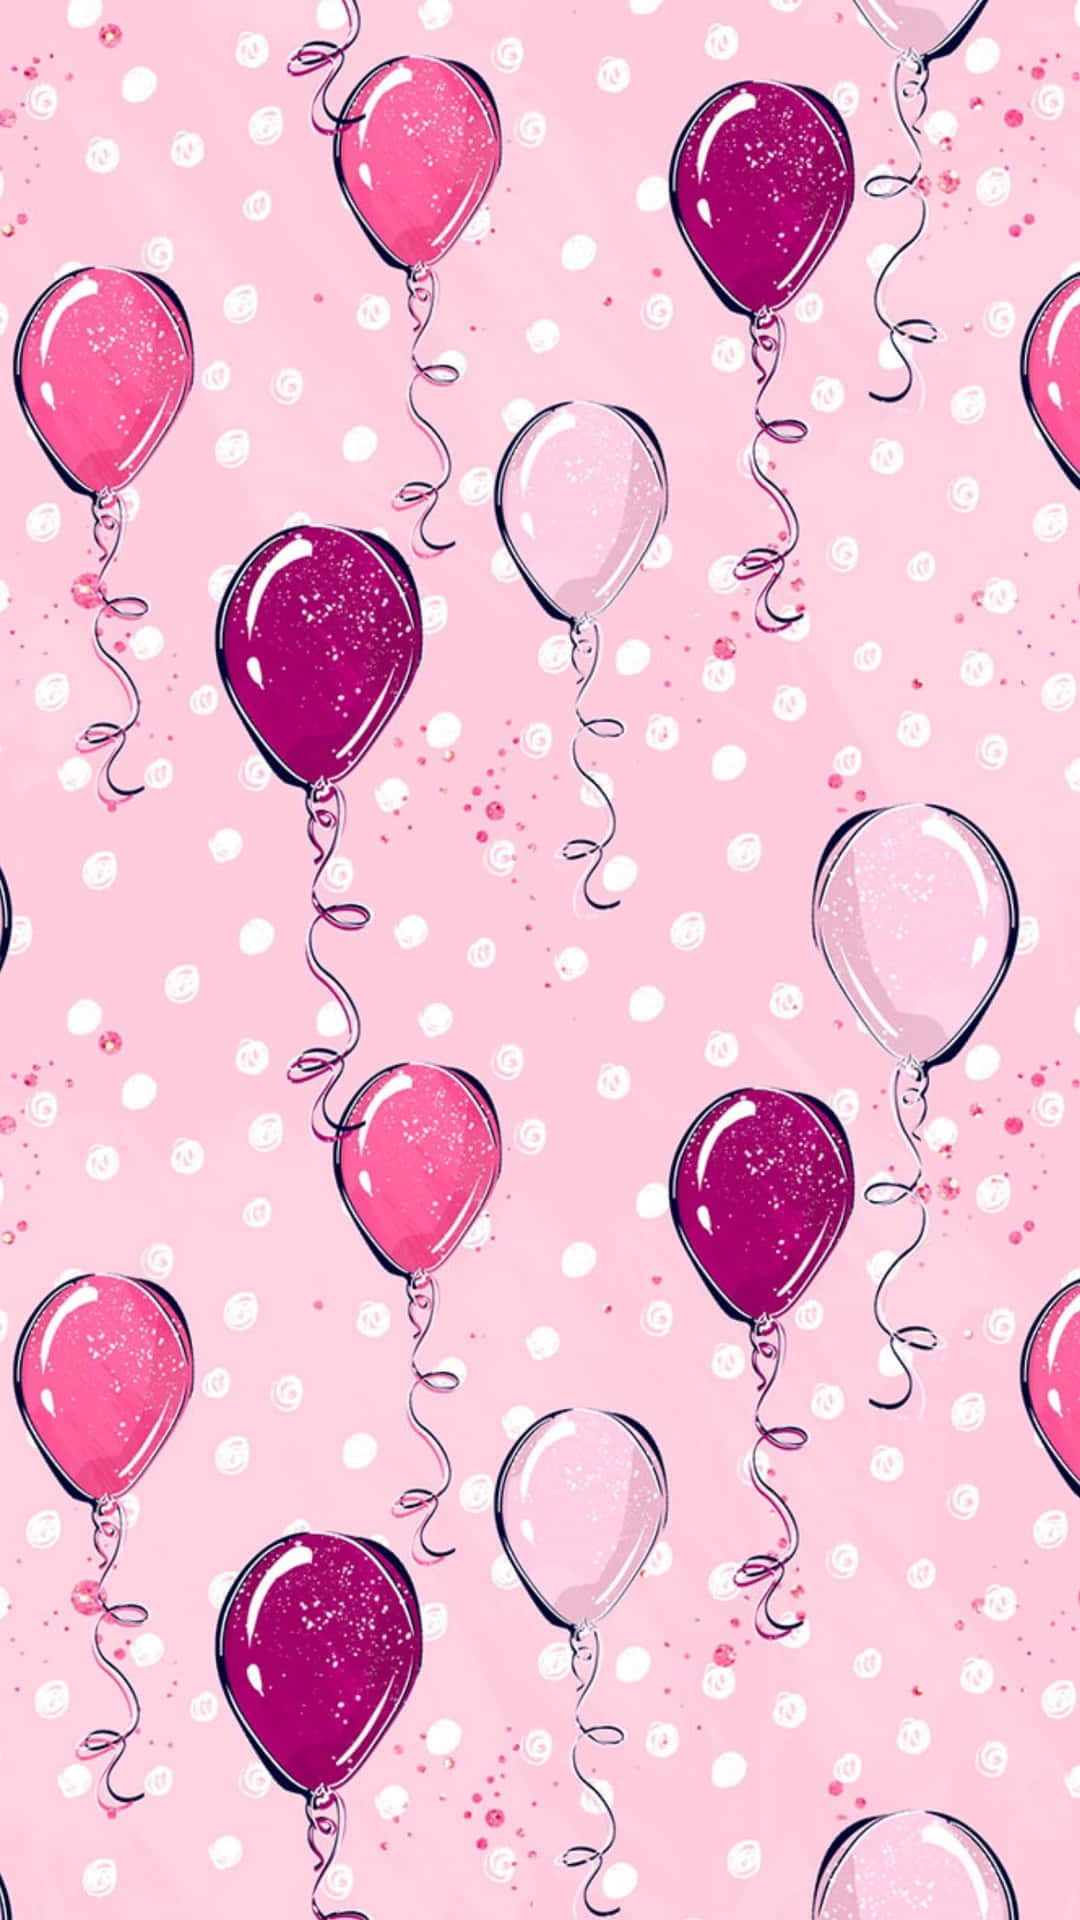 Pink And Pink Balloons On A Pink Background Wallpaper